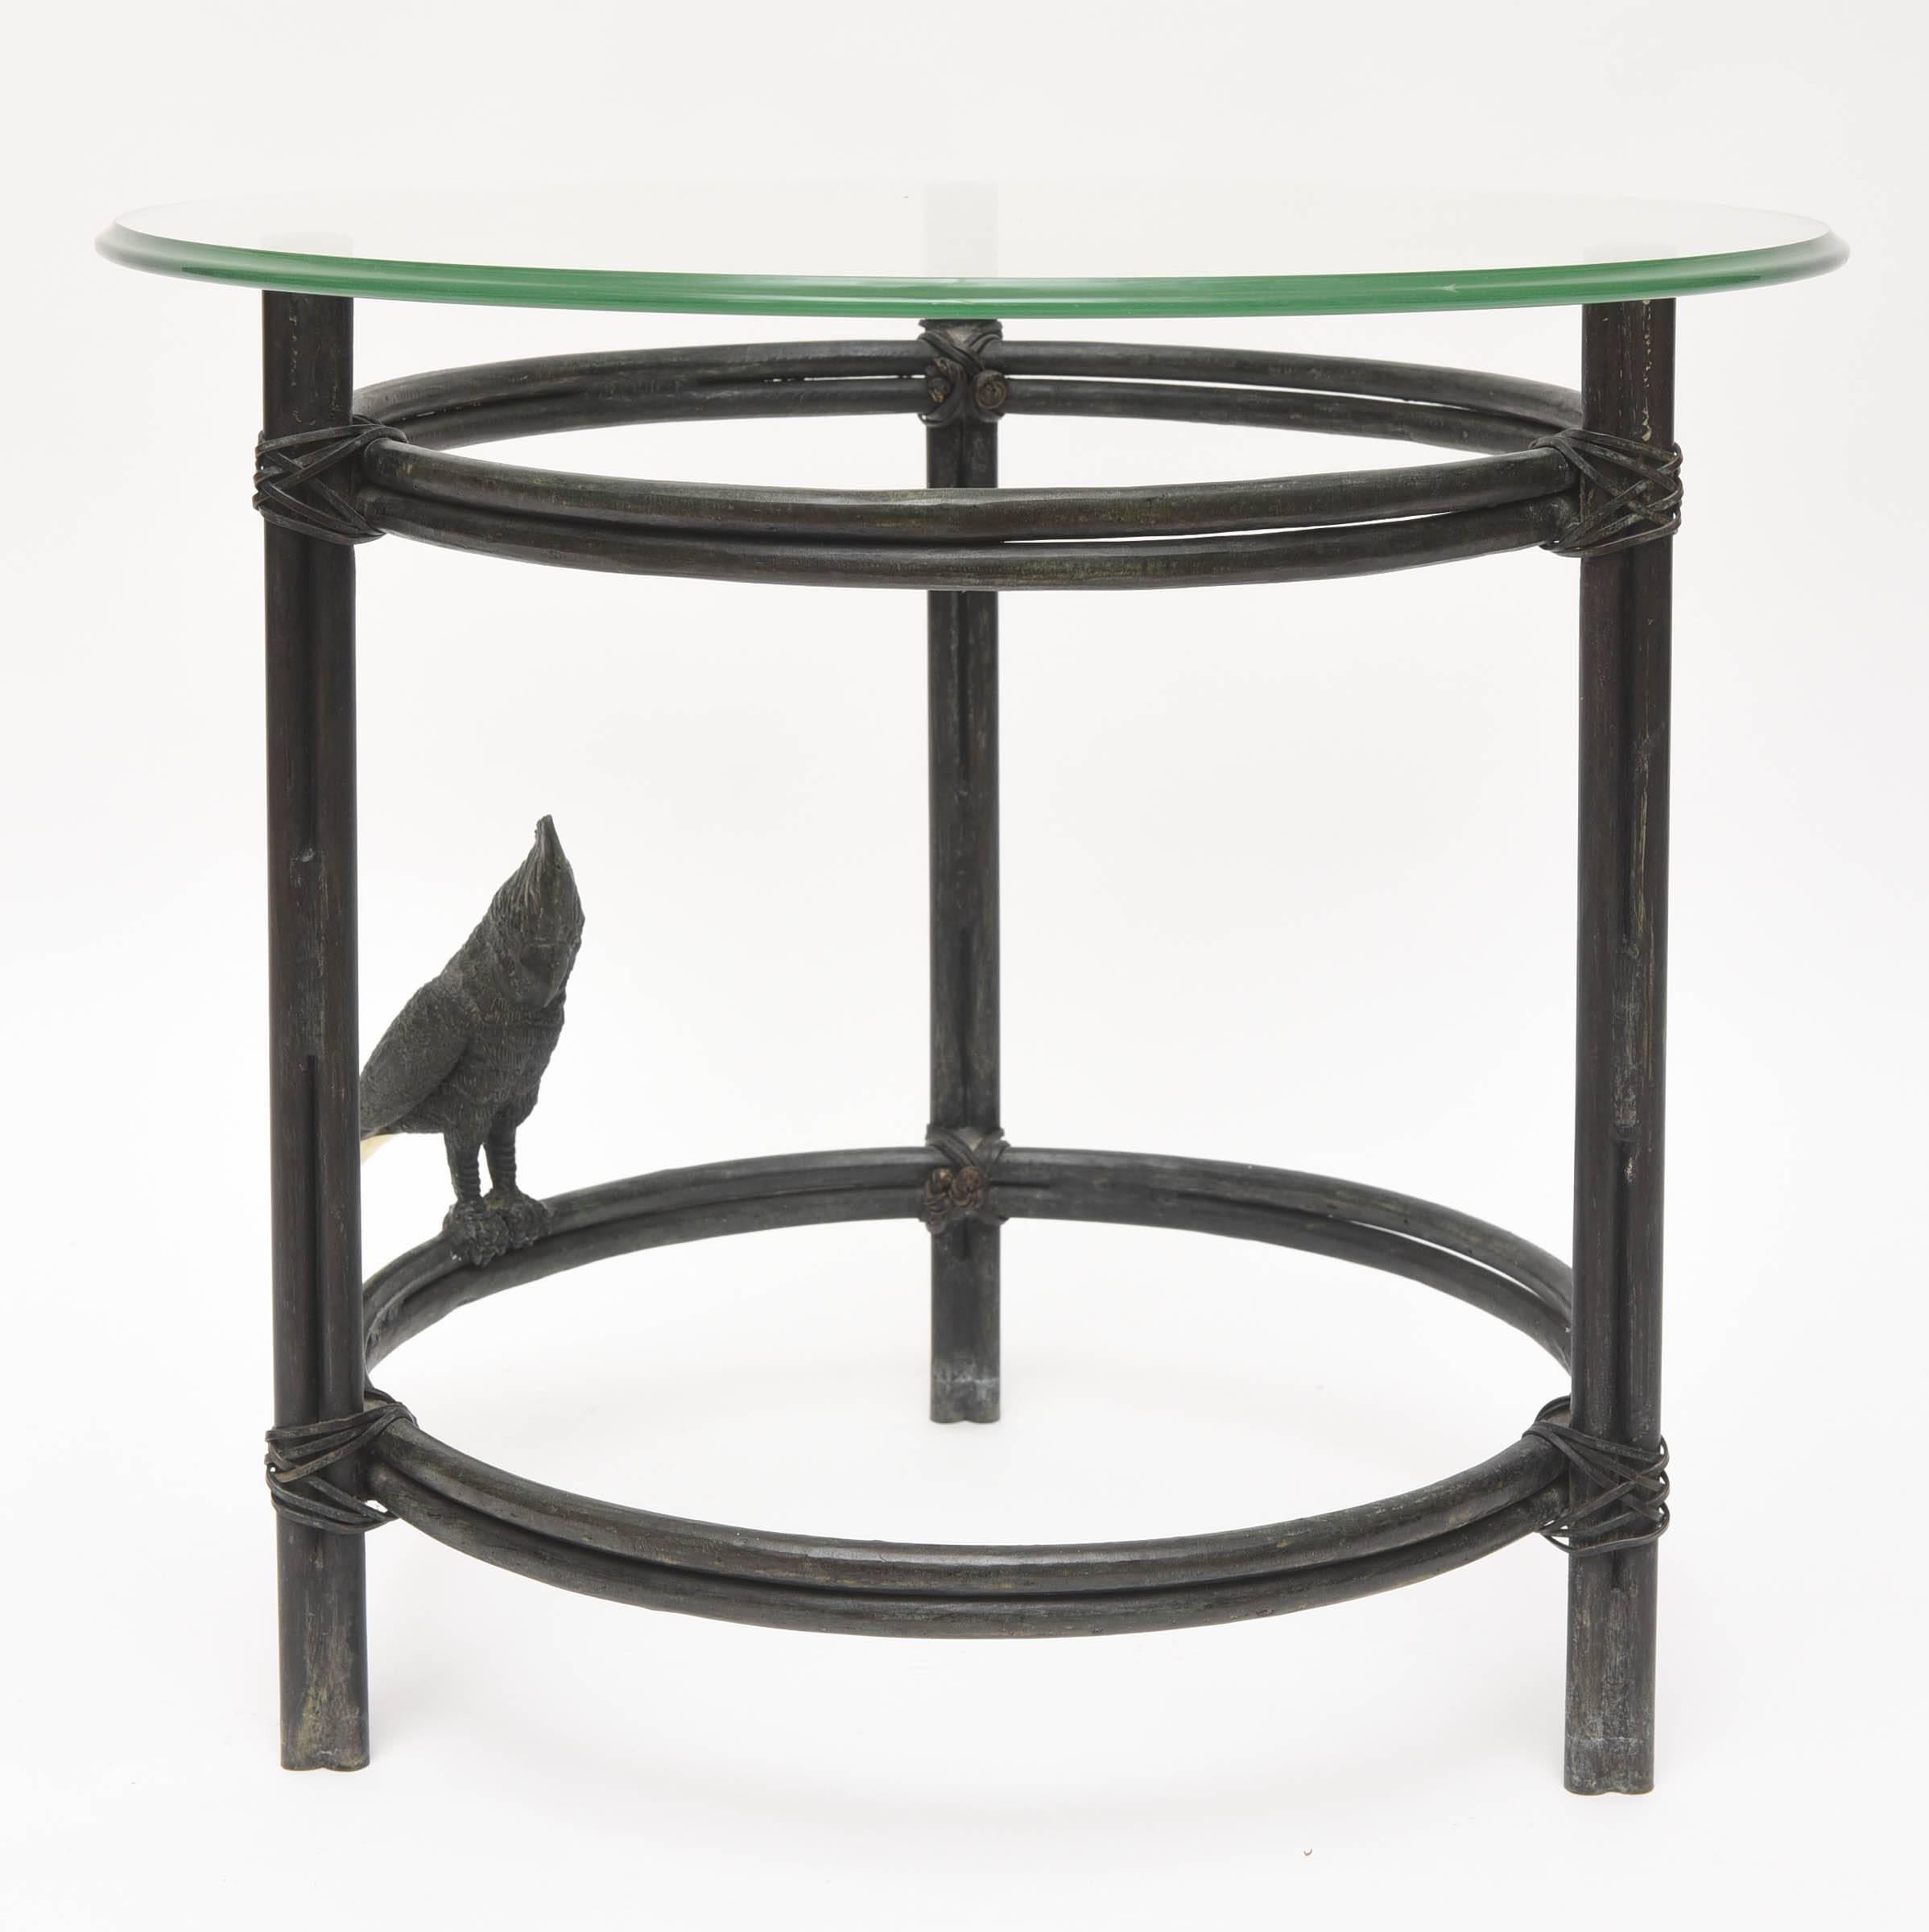 Original Maitland-Smith handmade solid bronze round side table with parrot figurine in the style of Diego Giacometti.
Heavy and made with great Craftsmanship.
Makers label on the table.